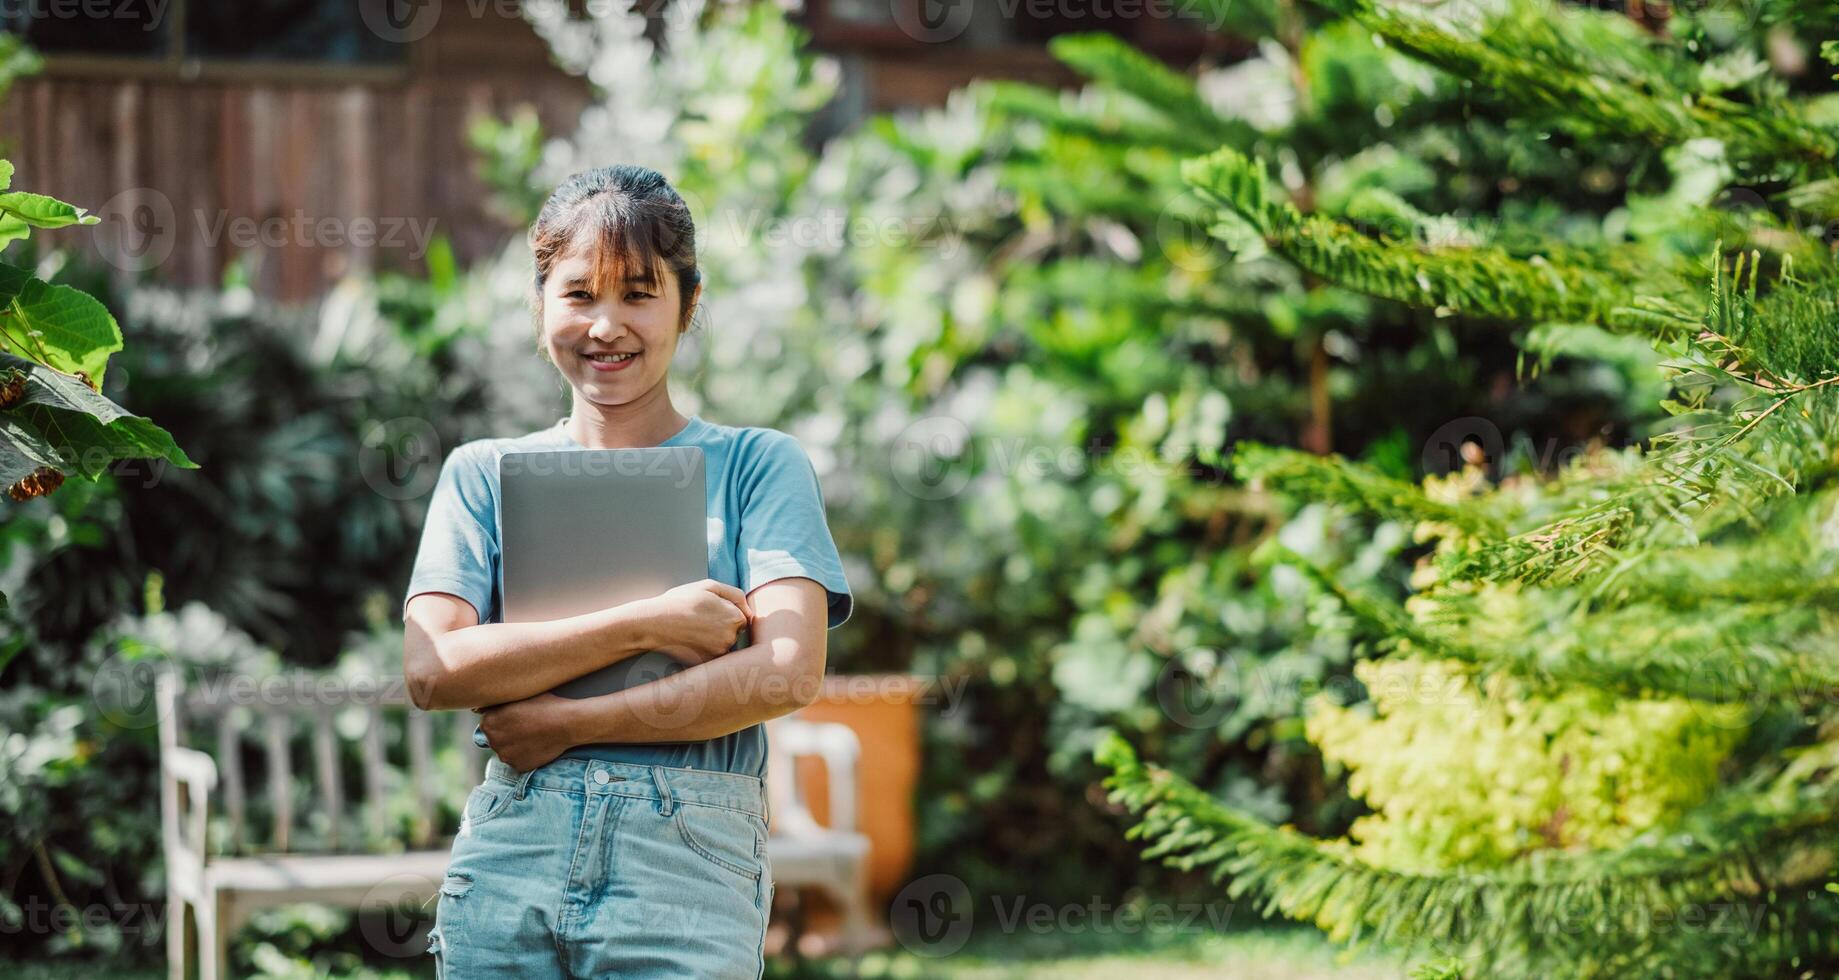 Smiling woman holding a laptop, standing in a lush garden, symbolizing work-life balance and remote work flexibility. photo